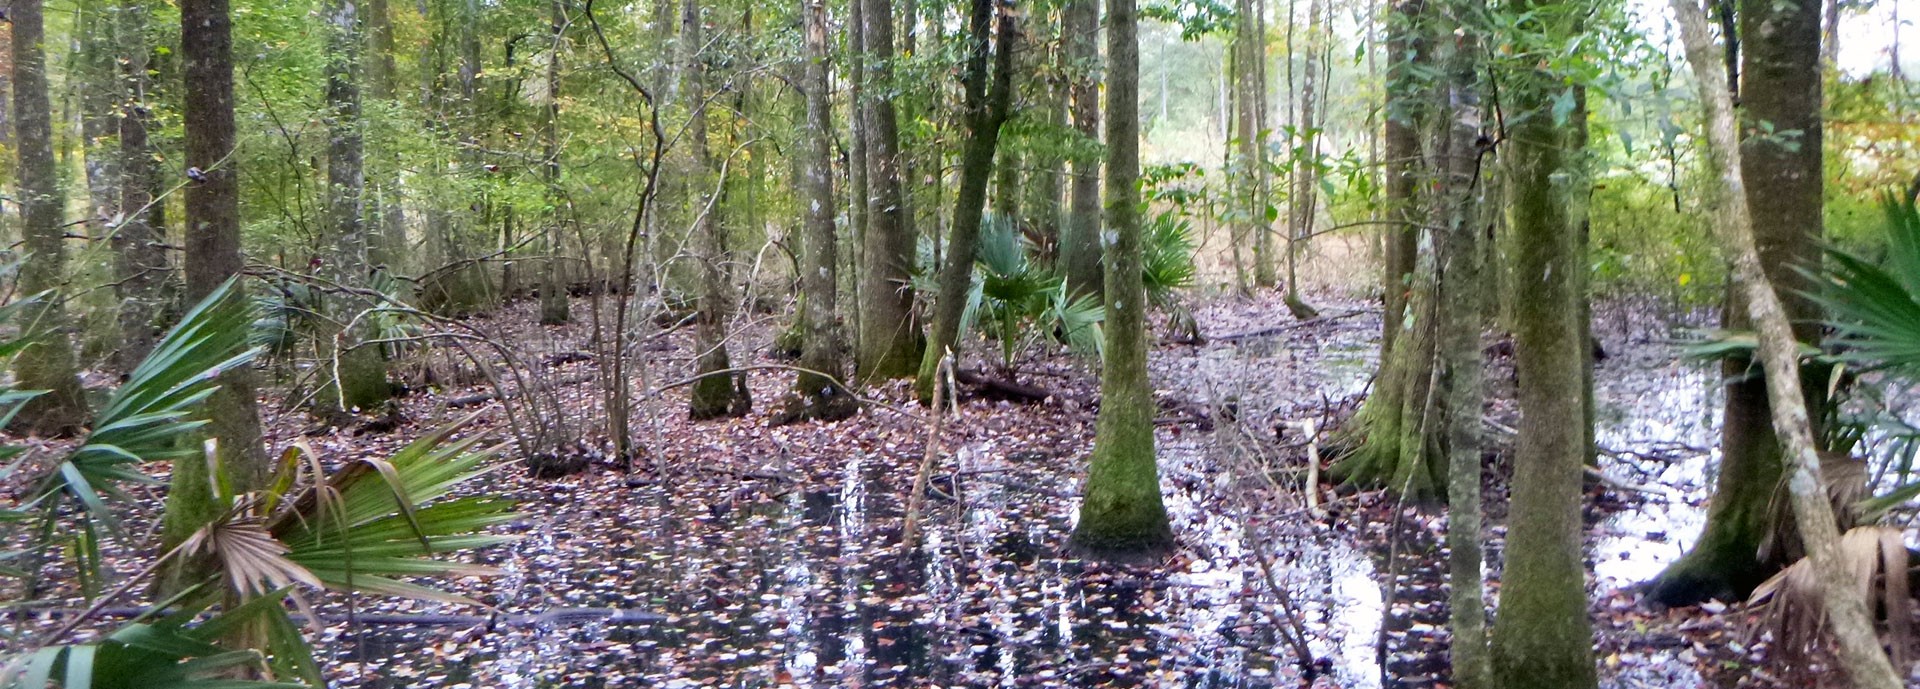 wetland in wooded gulf marsh area with water at bottom